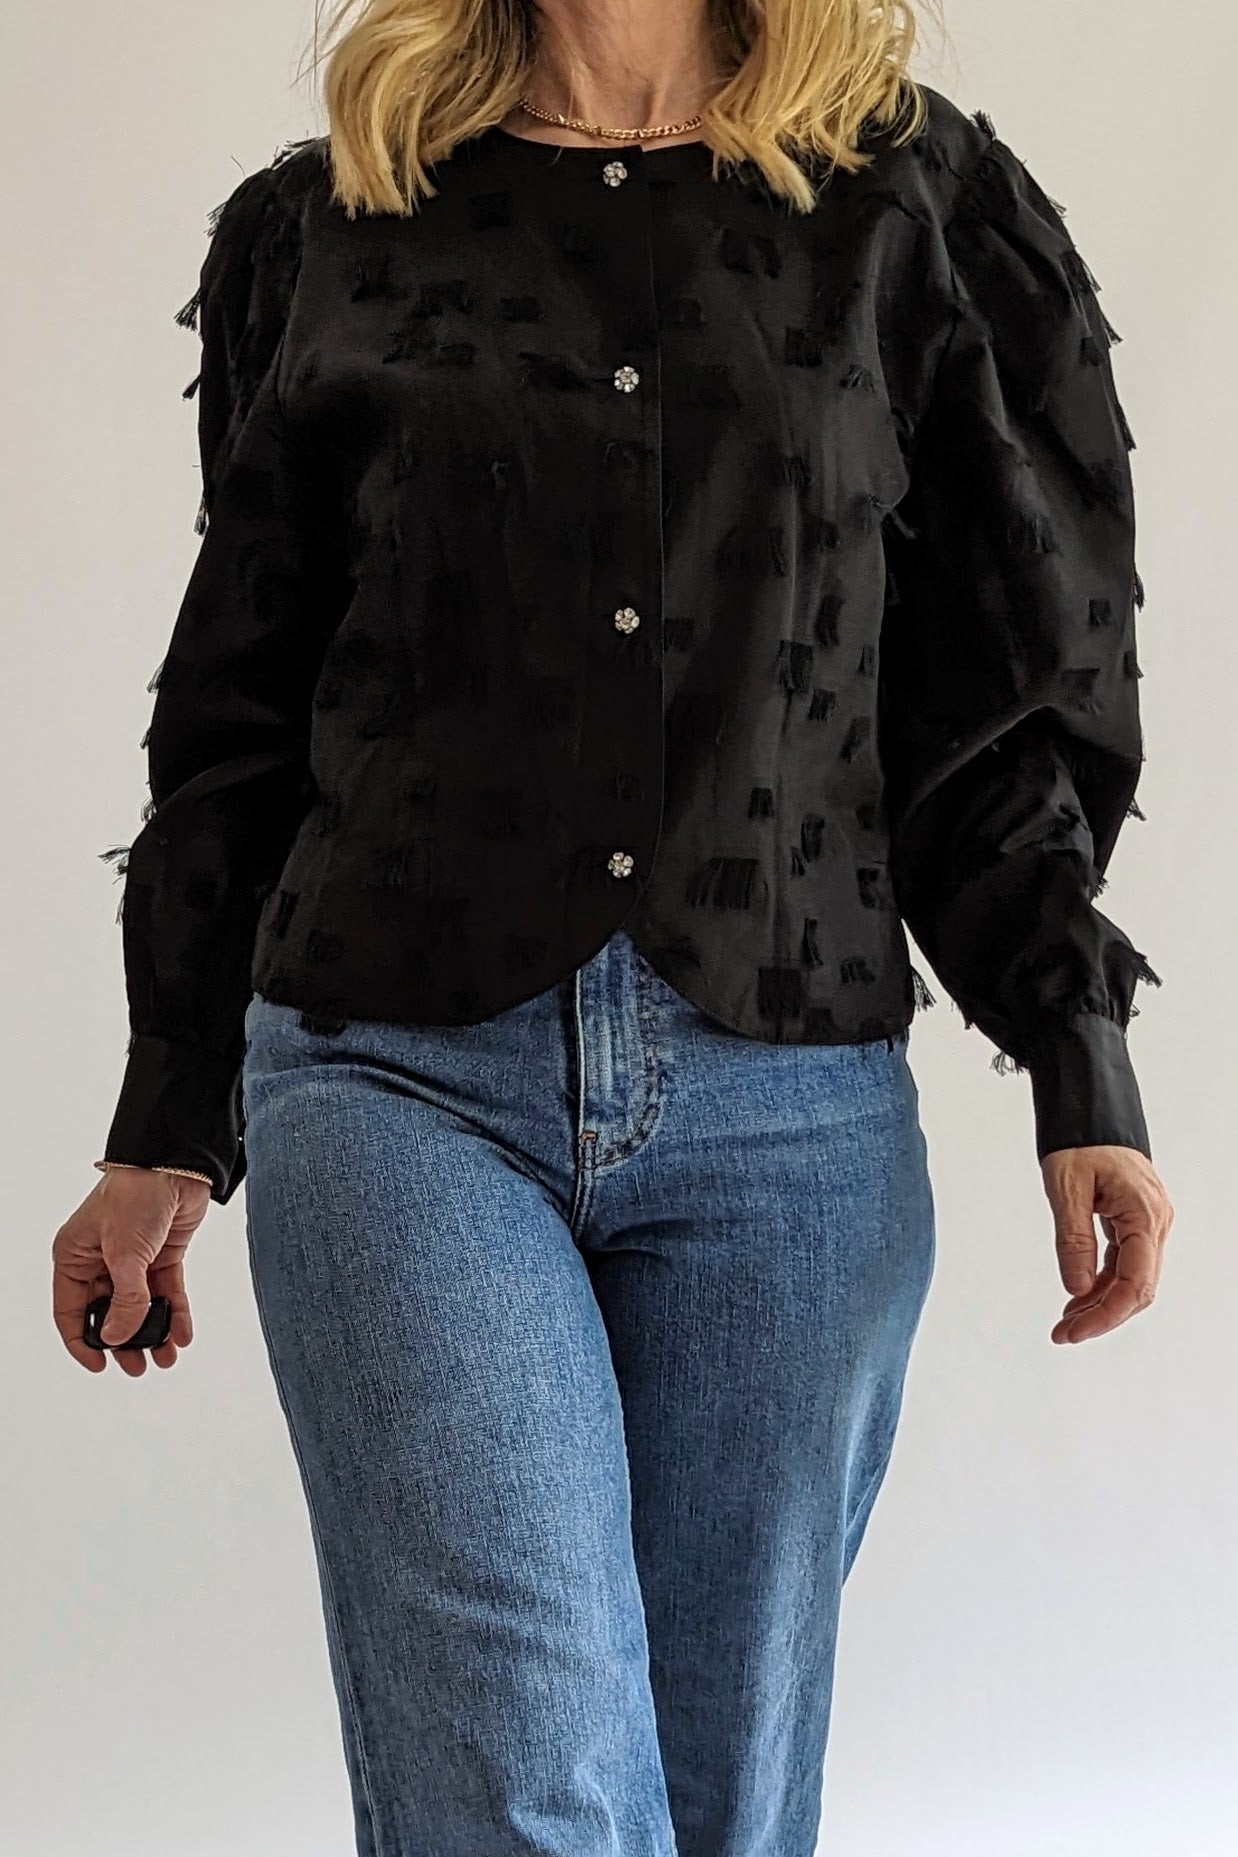 Givenchy delmonte buttoned jacket